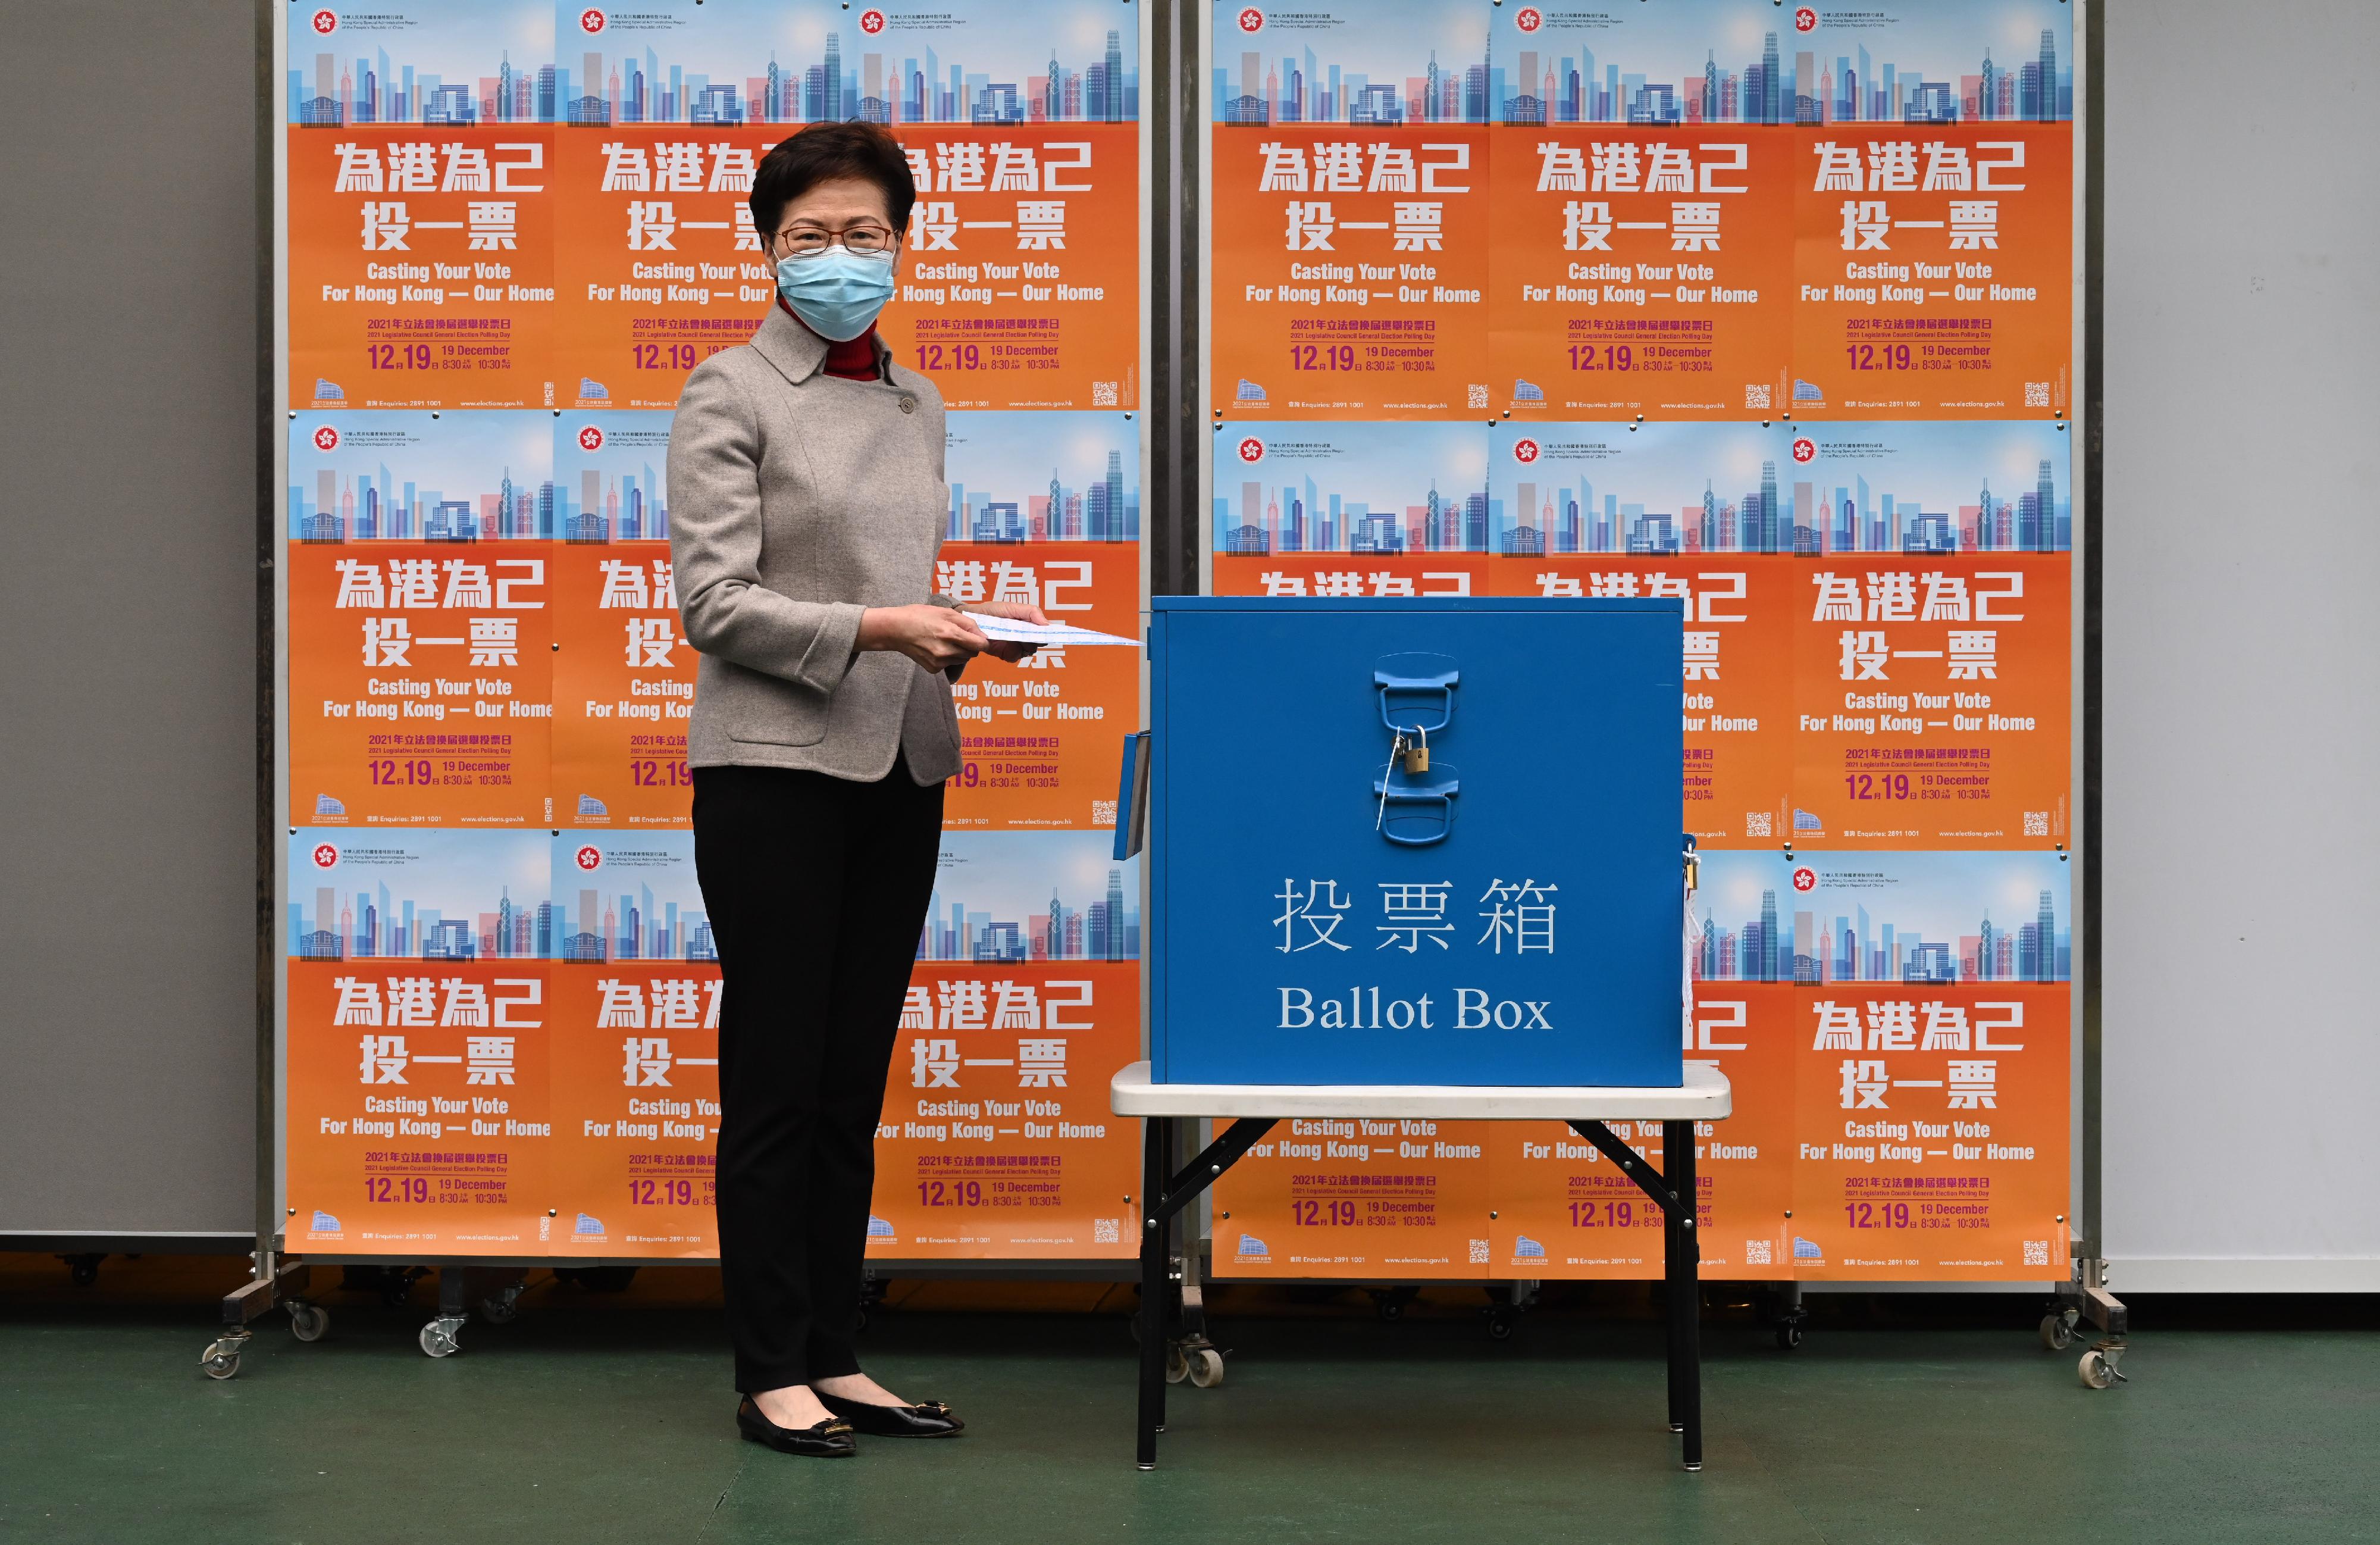 The Chief Executive, Mrs Carrie Lam, cast her vote in the 2021 Legislative Council General Election (LCGE) at Raimondi College this morning (December 19). Picture shows Mrs Lam casting her vote for the geographical constituency in the 2021 LCGE.